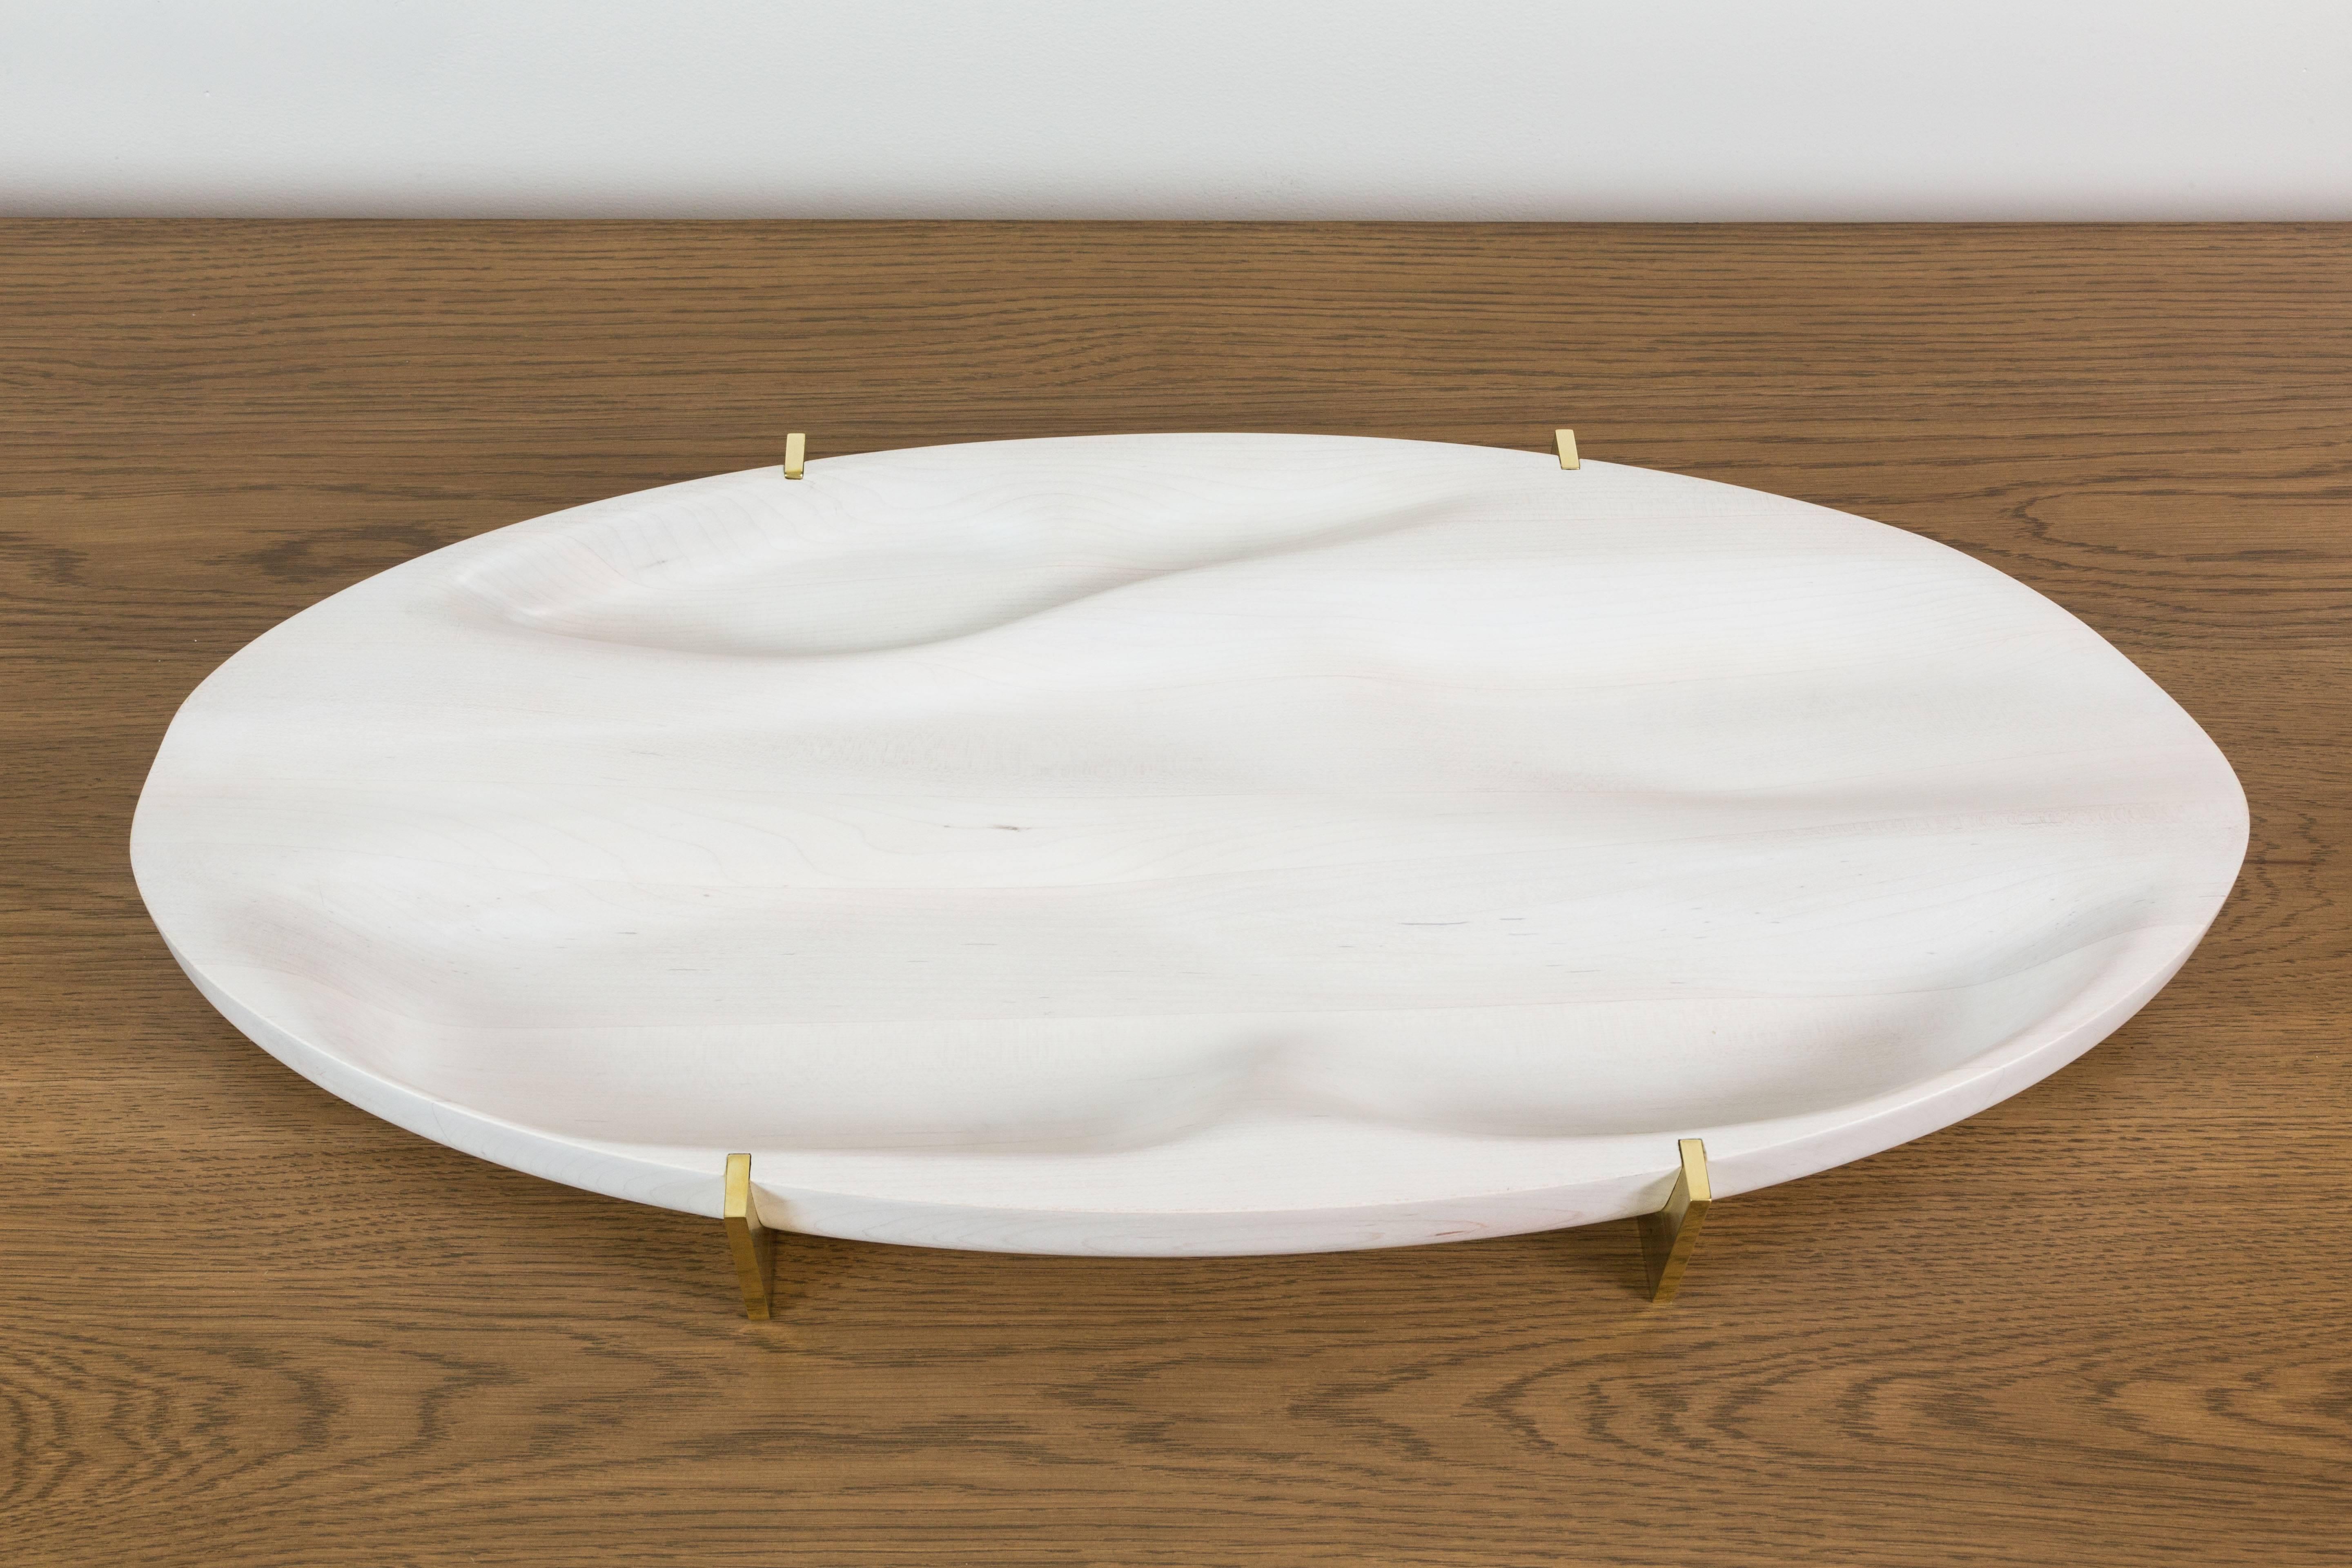 Bleached Maple and Brass Oval Tray by Vincent Pocsik for Lawson-Fenning 3